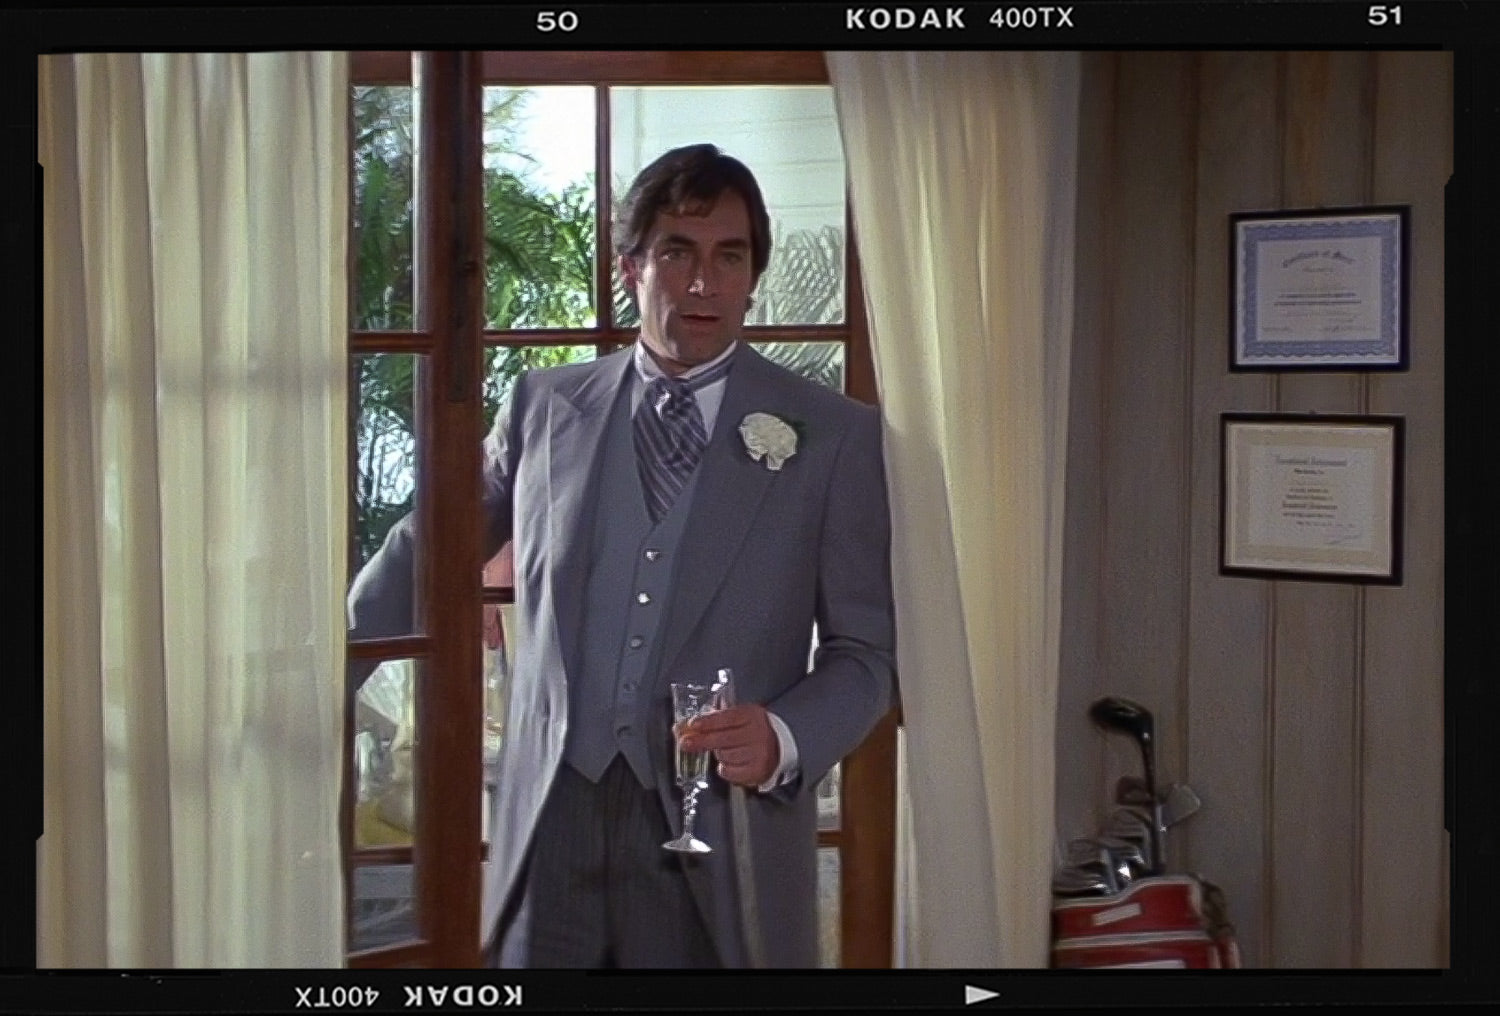 Timothy Dalton's morning suit in License to Kill is a more controversial James Bond look.